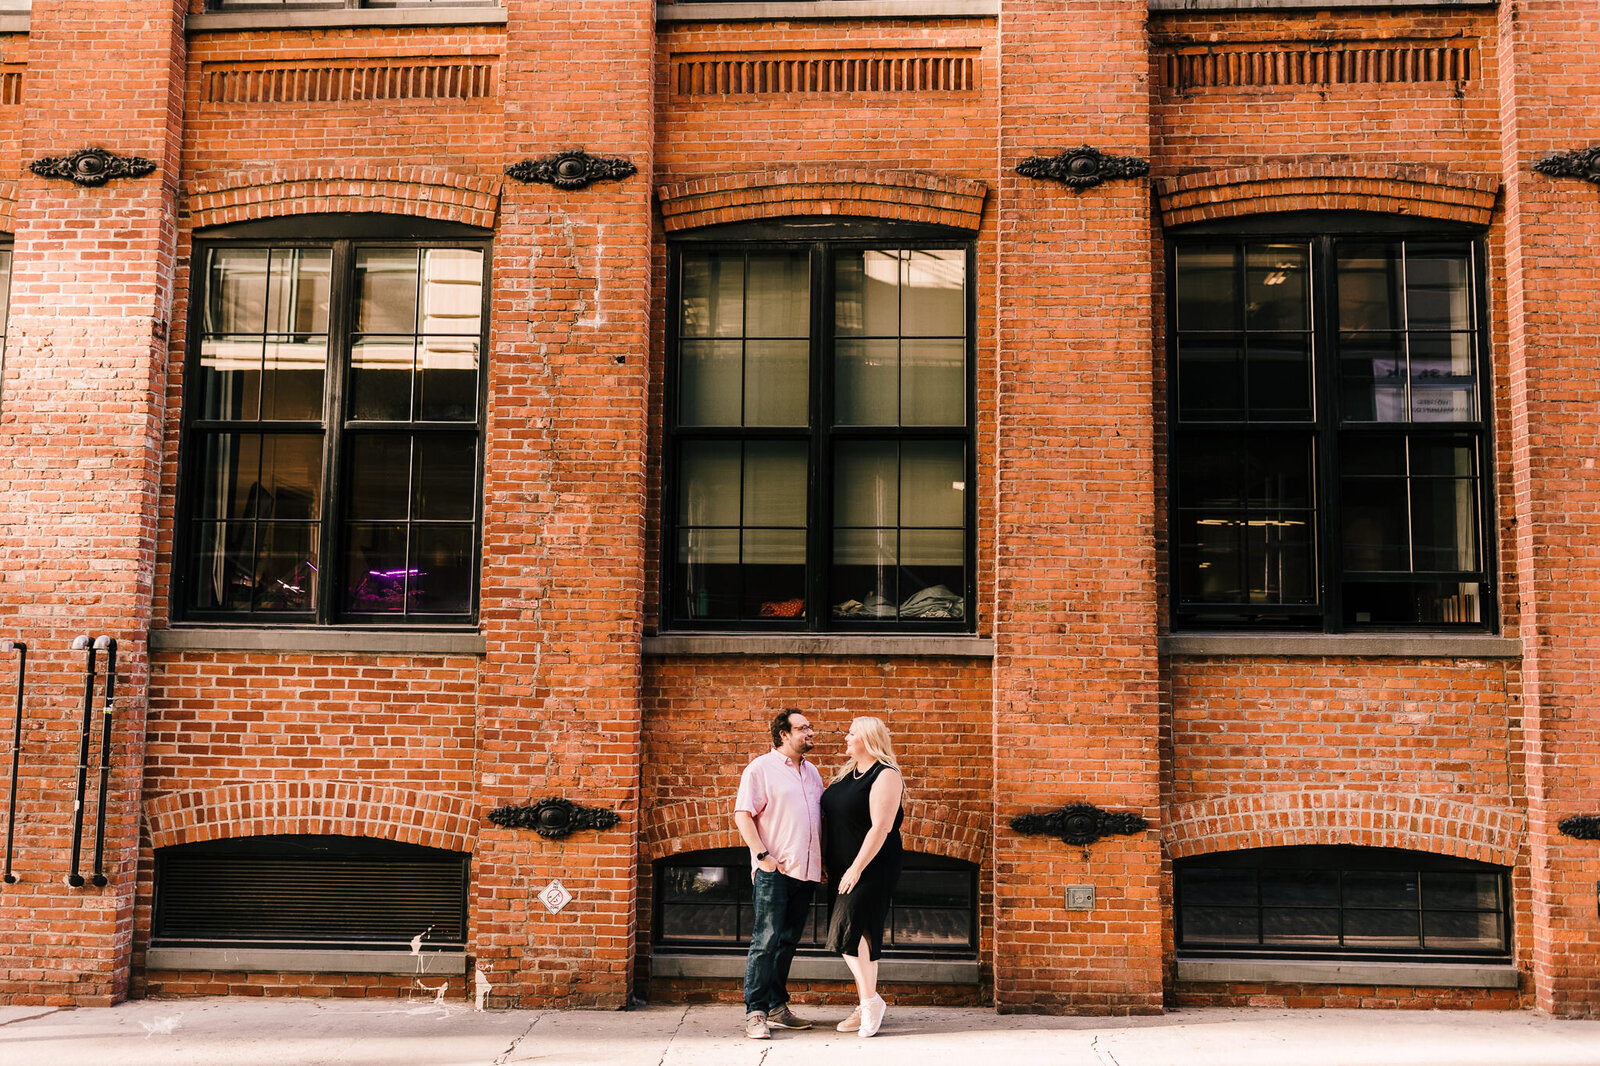 sunset-dumbo-brooklyn-engagement-photos-rebecca-renner-photography-2